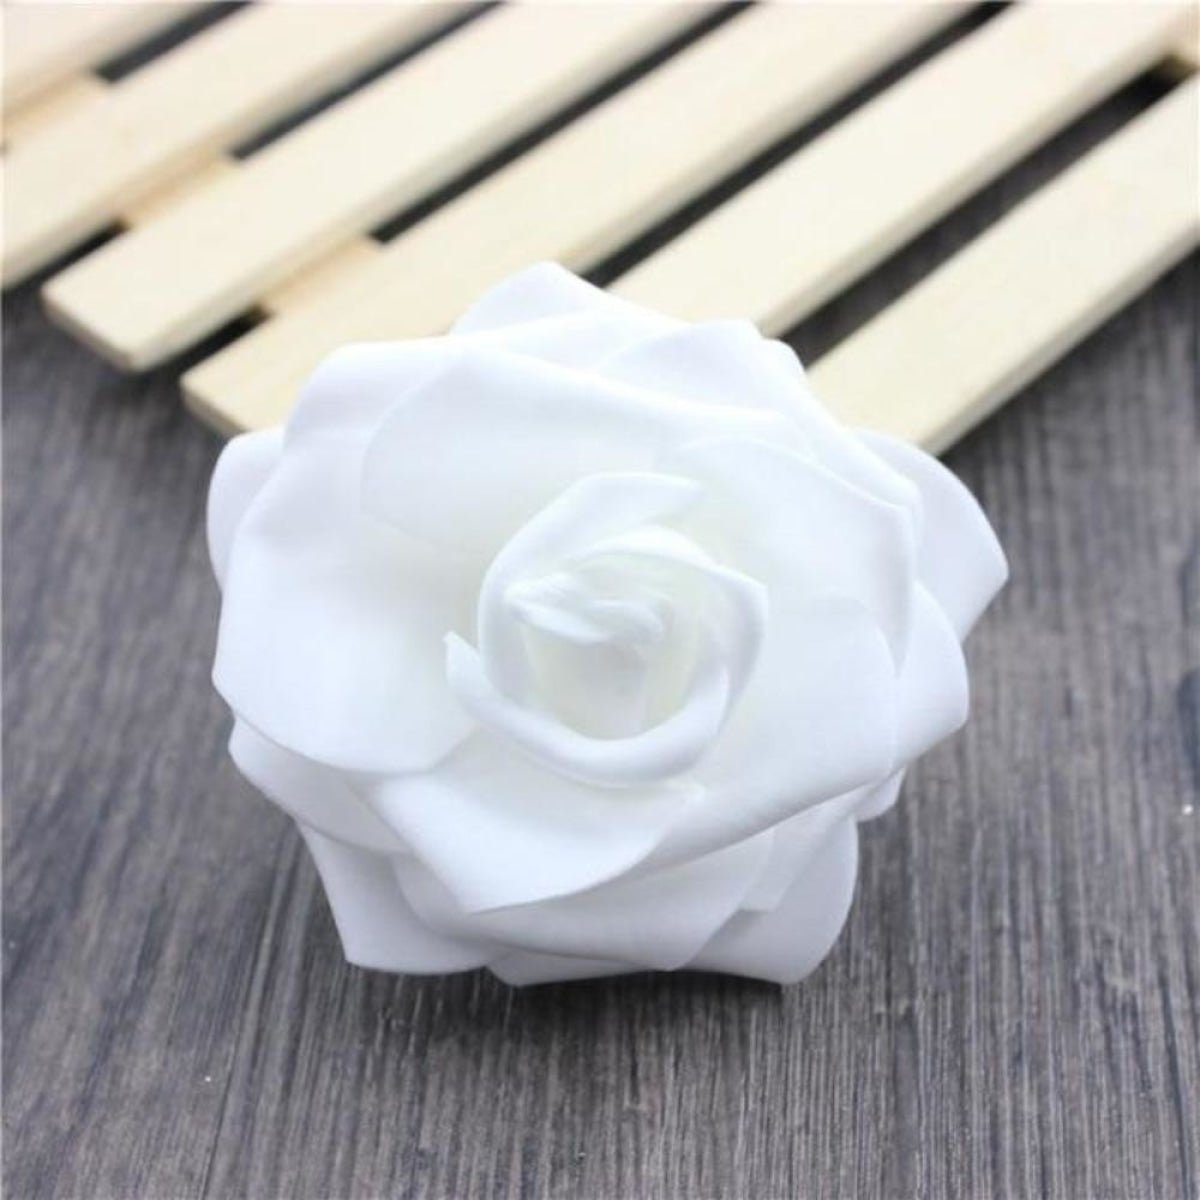 7.5cm Artificial Fake Flowers Foam Rose Head For Wedding Decorations DIY Wreaths - 24pcs White - Asia Sell